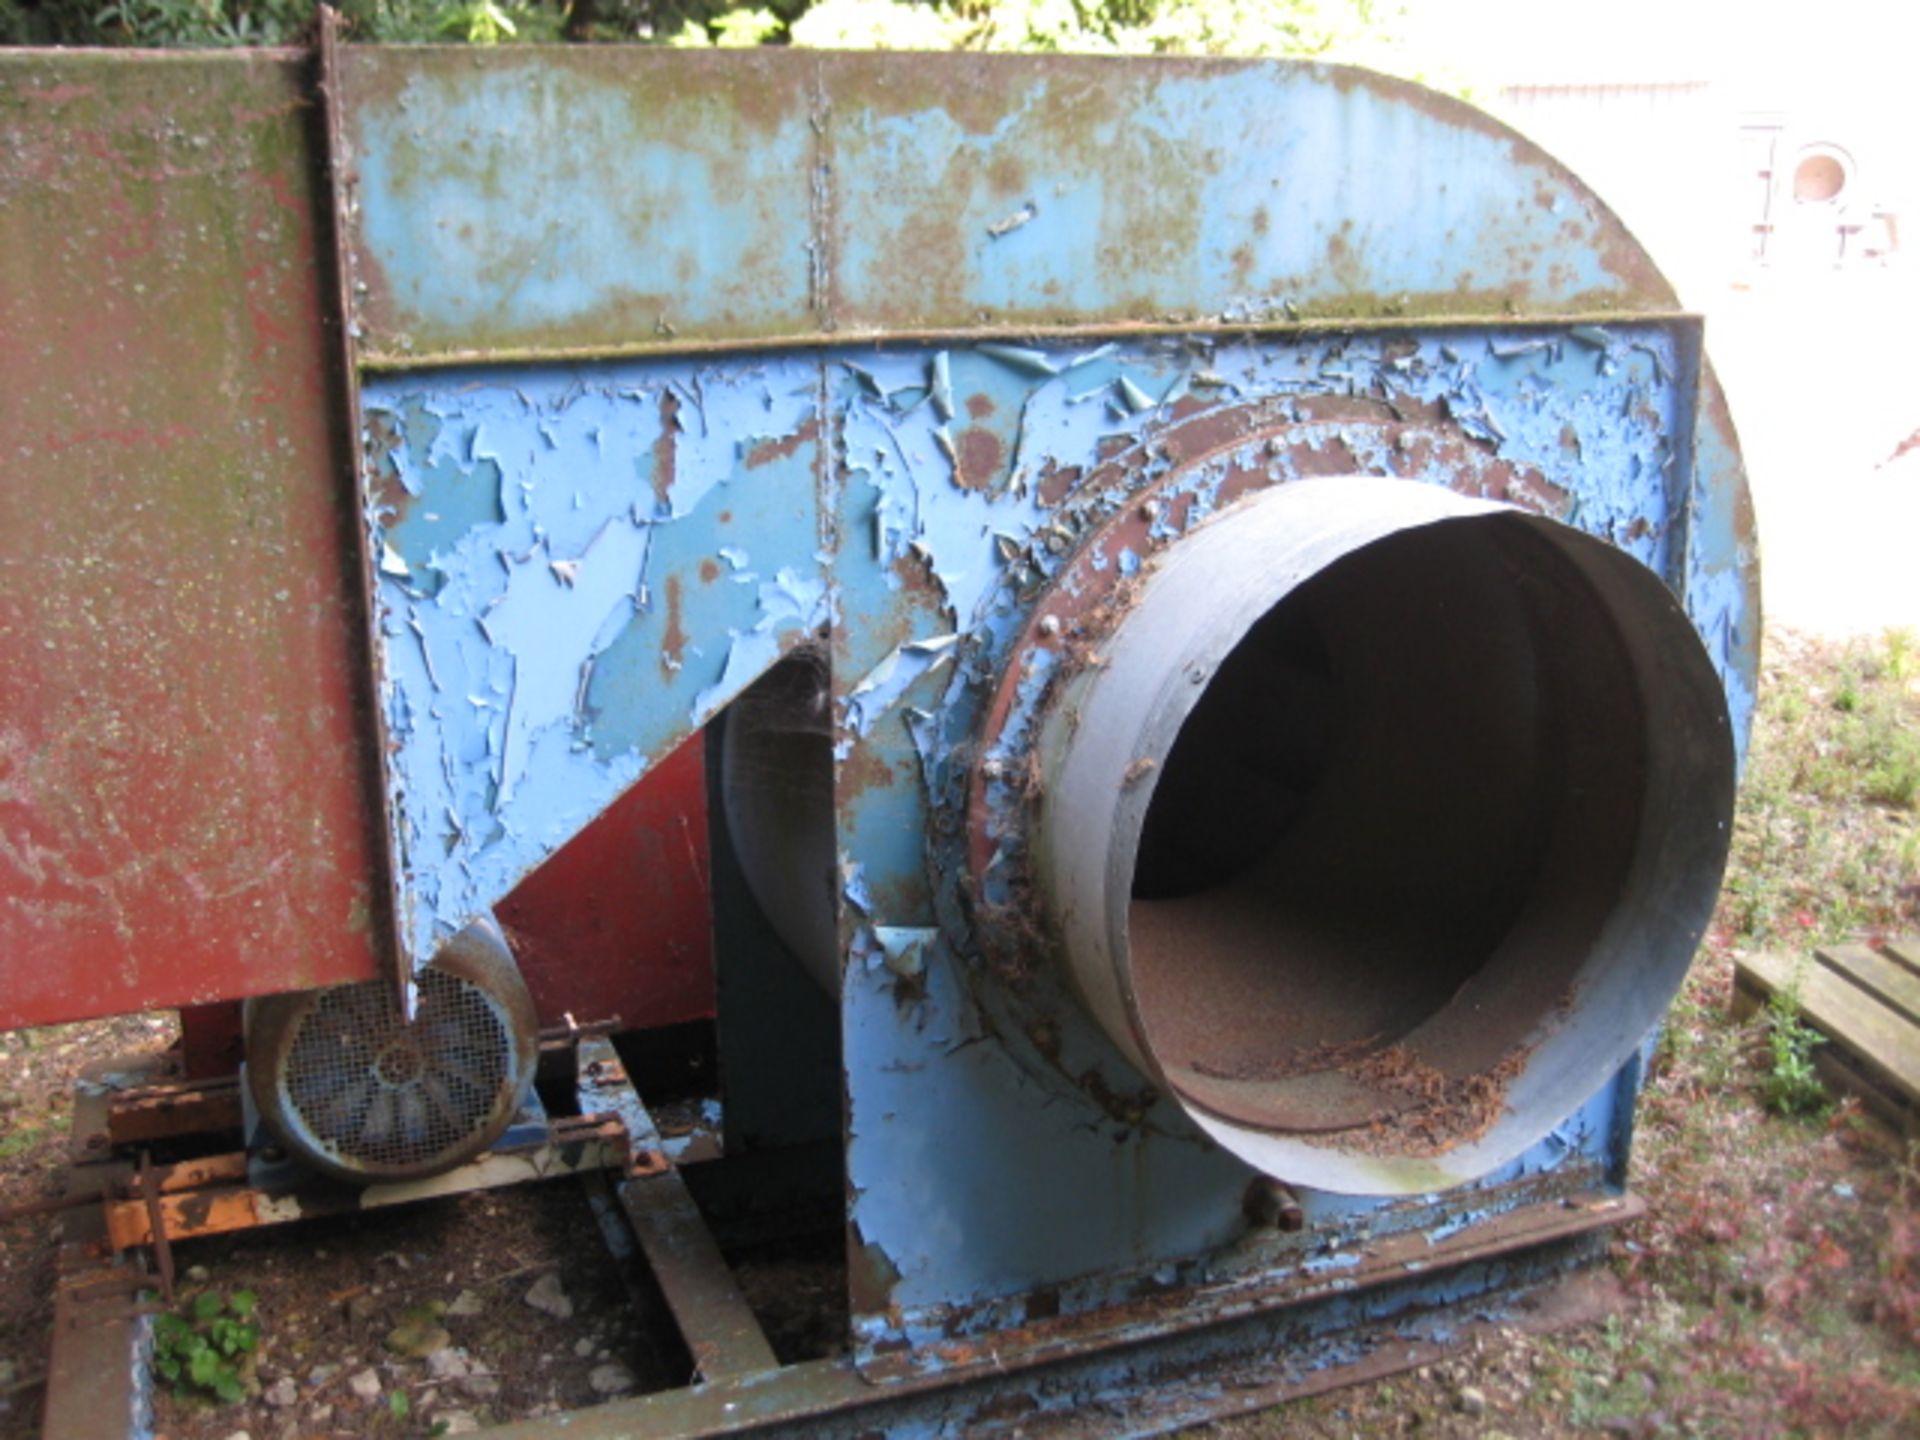 Provenair centrifugal belt driven fan model 30B Size C75 with 30kw motor. Lot located at Navenby, - Image 3 of 5